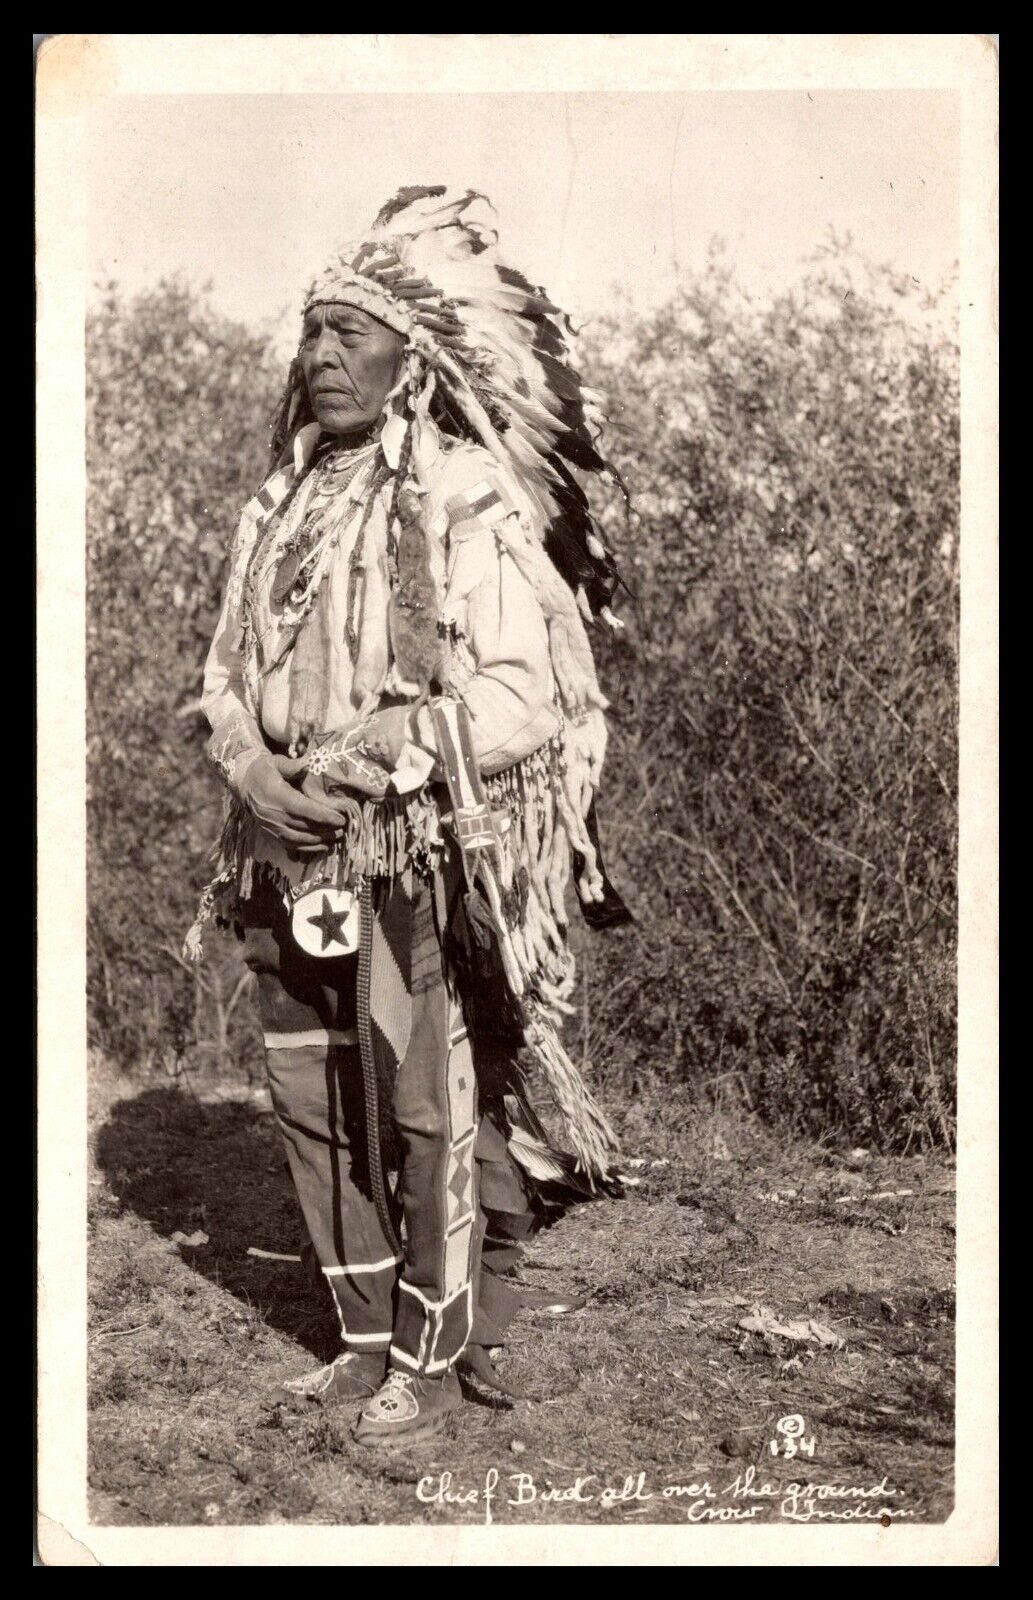 c1920s RPPC Post Card. Crow Indian Chief, Bird All Over The Ground.